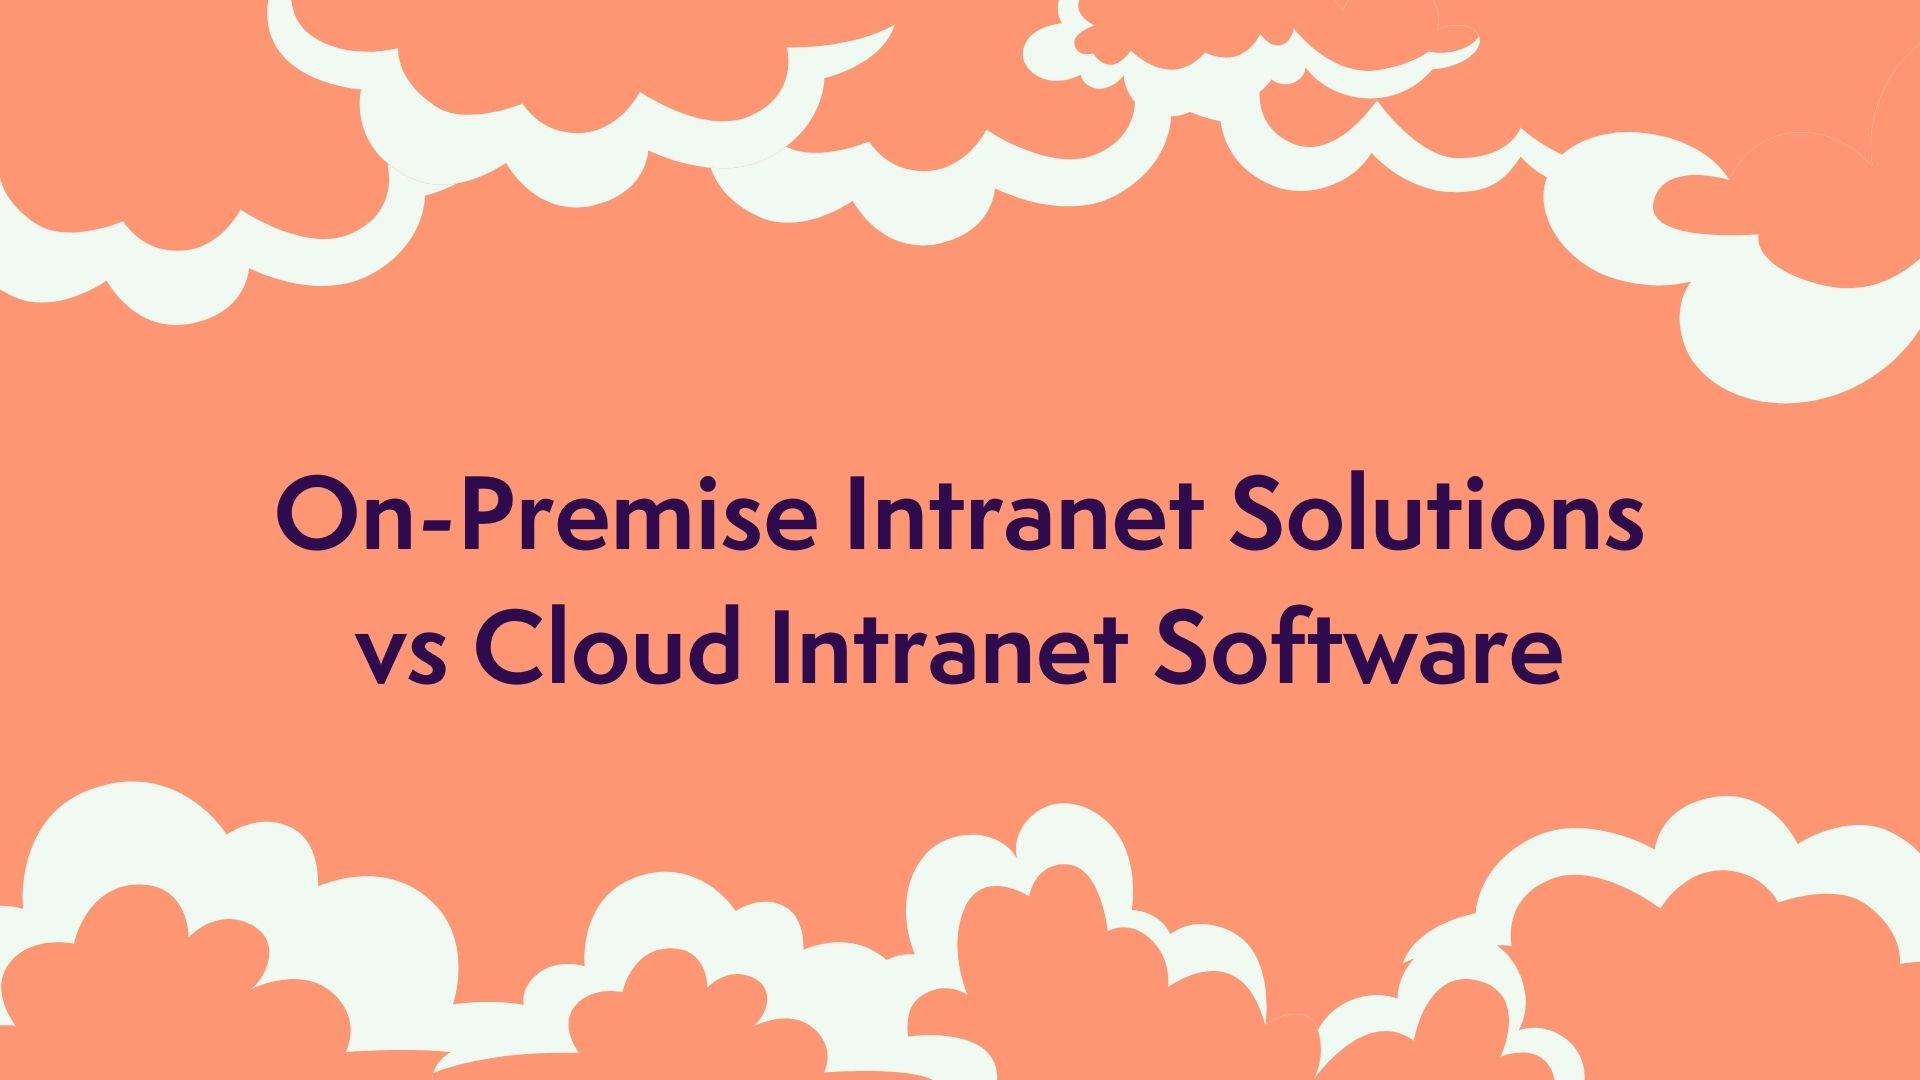 On-Premise Intranet Solutions vs Cloud Intranet Software